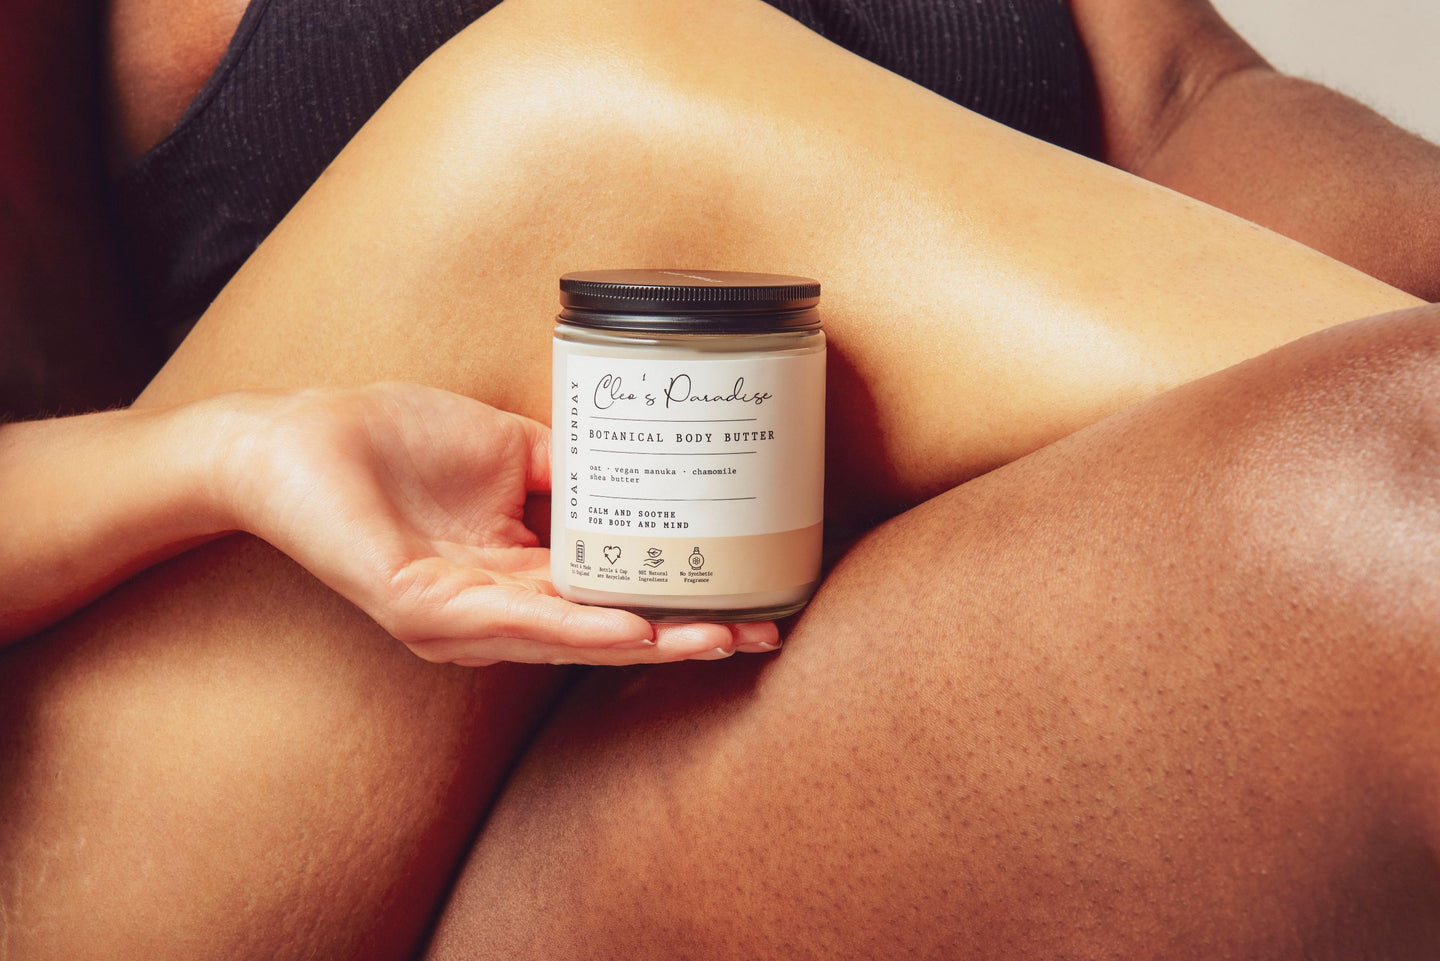 Botanical Body Butters